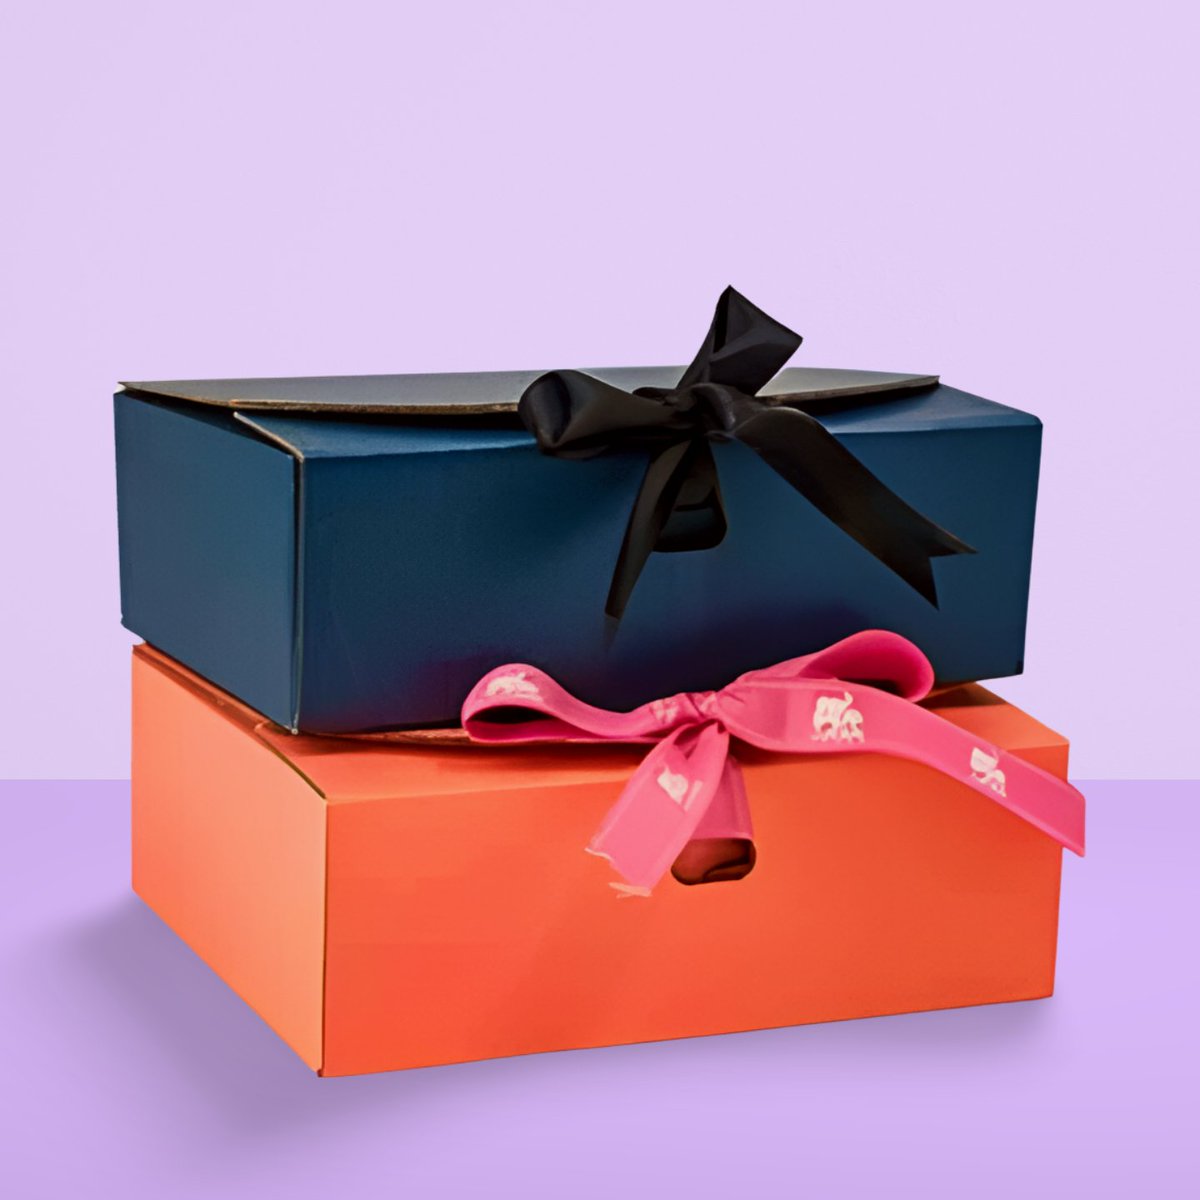 Utilize our Custom Gift Boxes to create precious recollections
Place an Order:
customboxesrange.com/gift-boxes/
#giftboxes #giftbox #customgiftboxes #giftpackagingboxes #customgiftbox #giftboxpackaging #giftpackaging